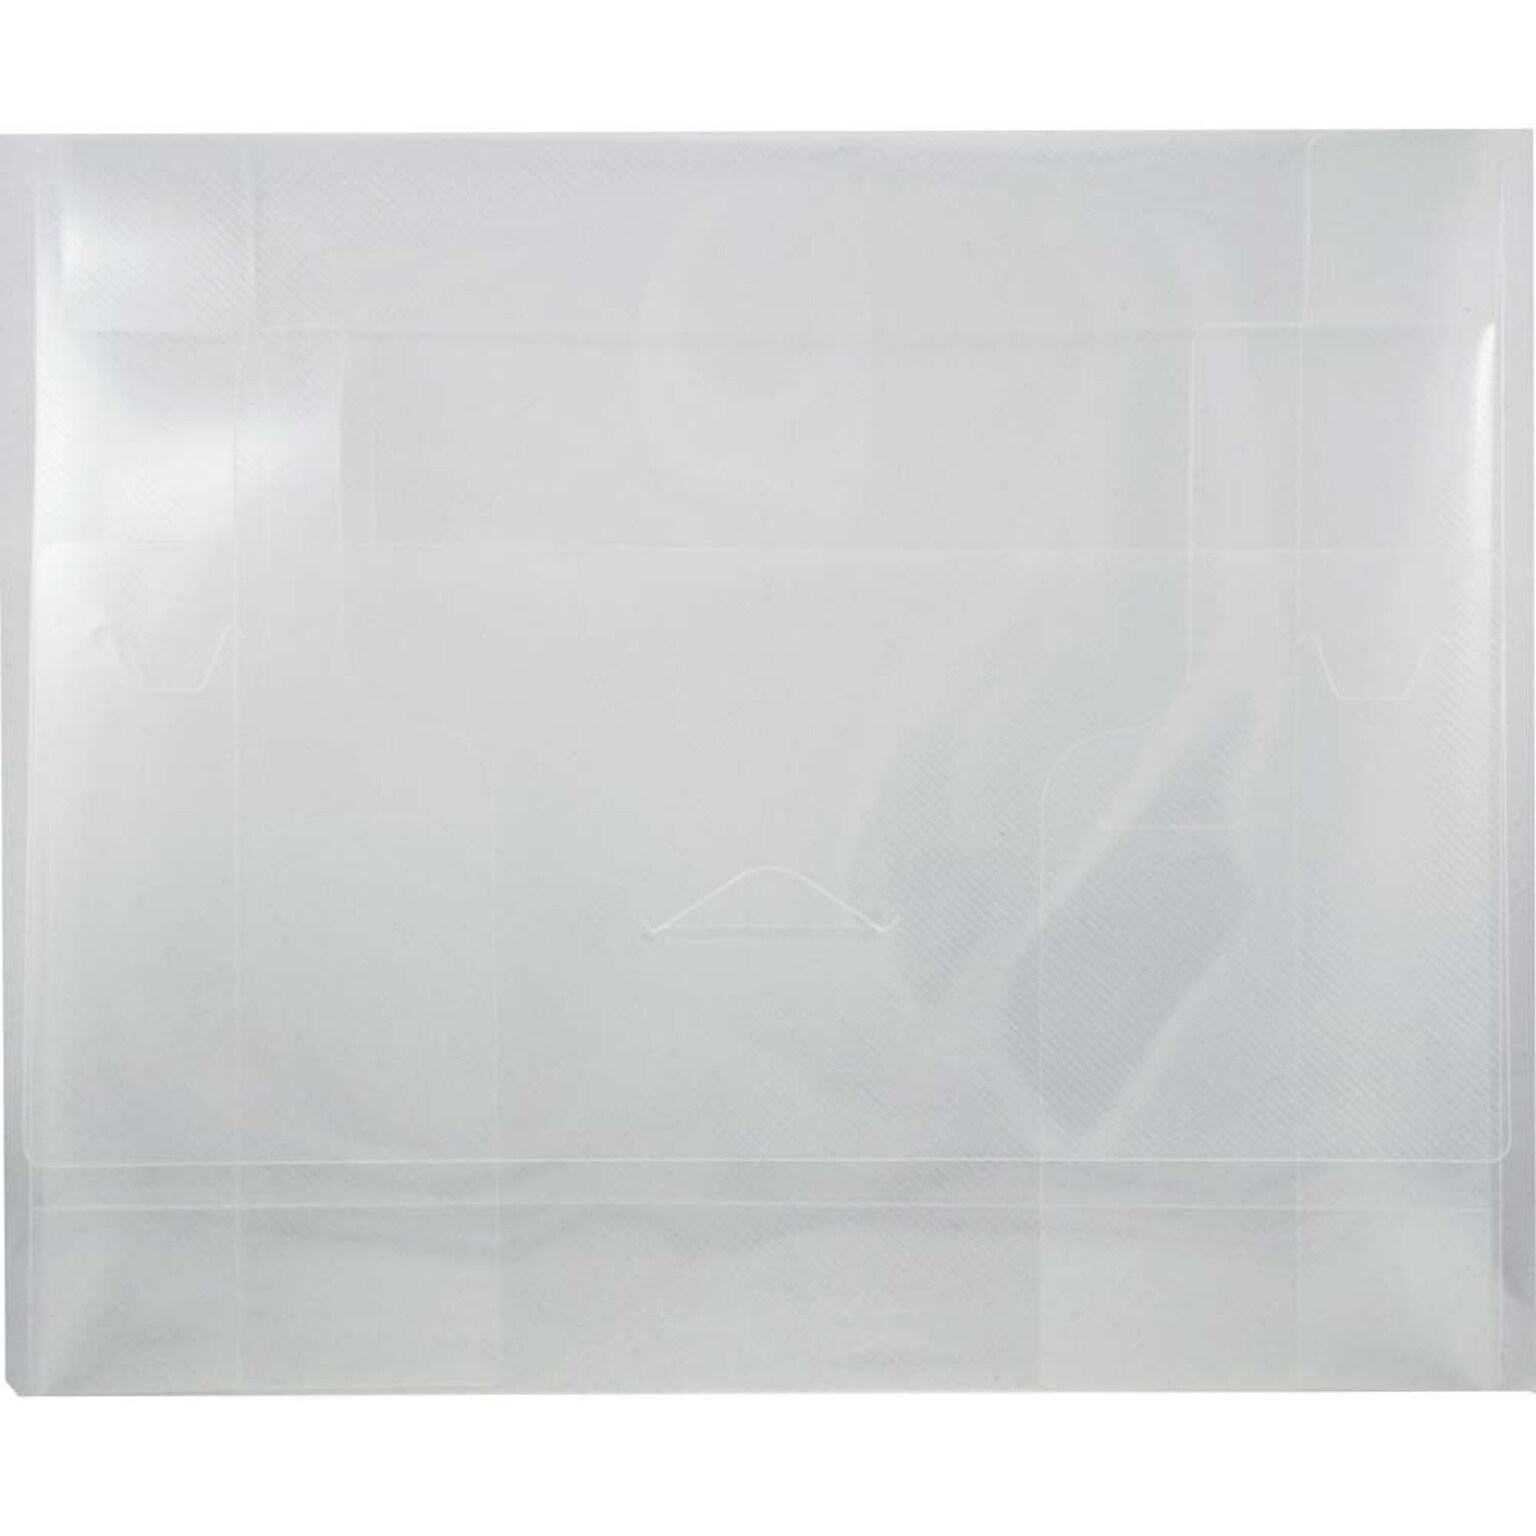 JAM Paper® Plastic Portfolio with Tuck Flap Closure, Letter Booklet, 9 1/2 x 12 3/8, Clear Grid, Sold Individually (52530CLBULK)